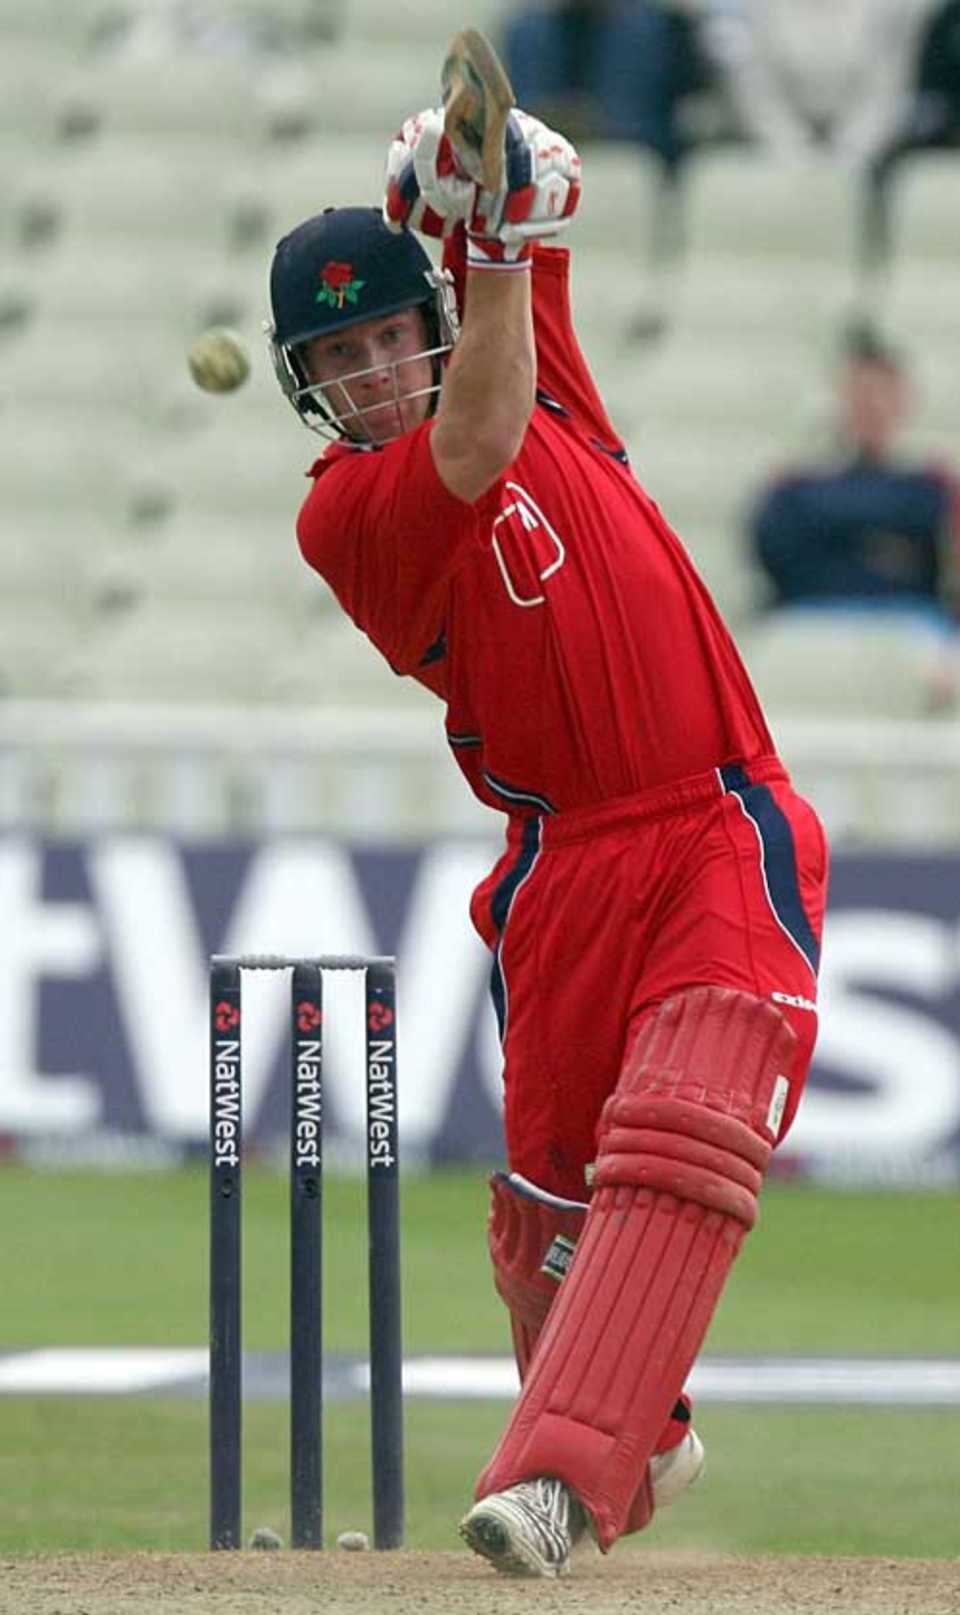 Steven Croft helped Lancashire home with 39